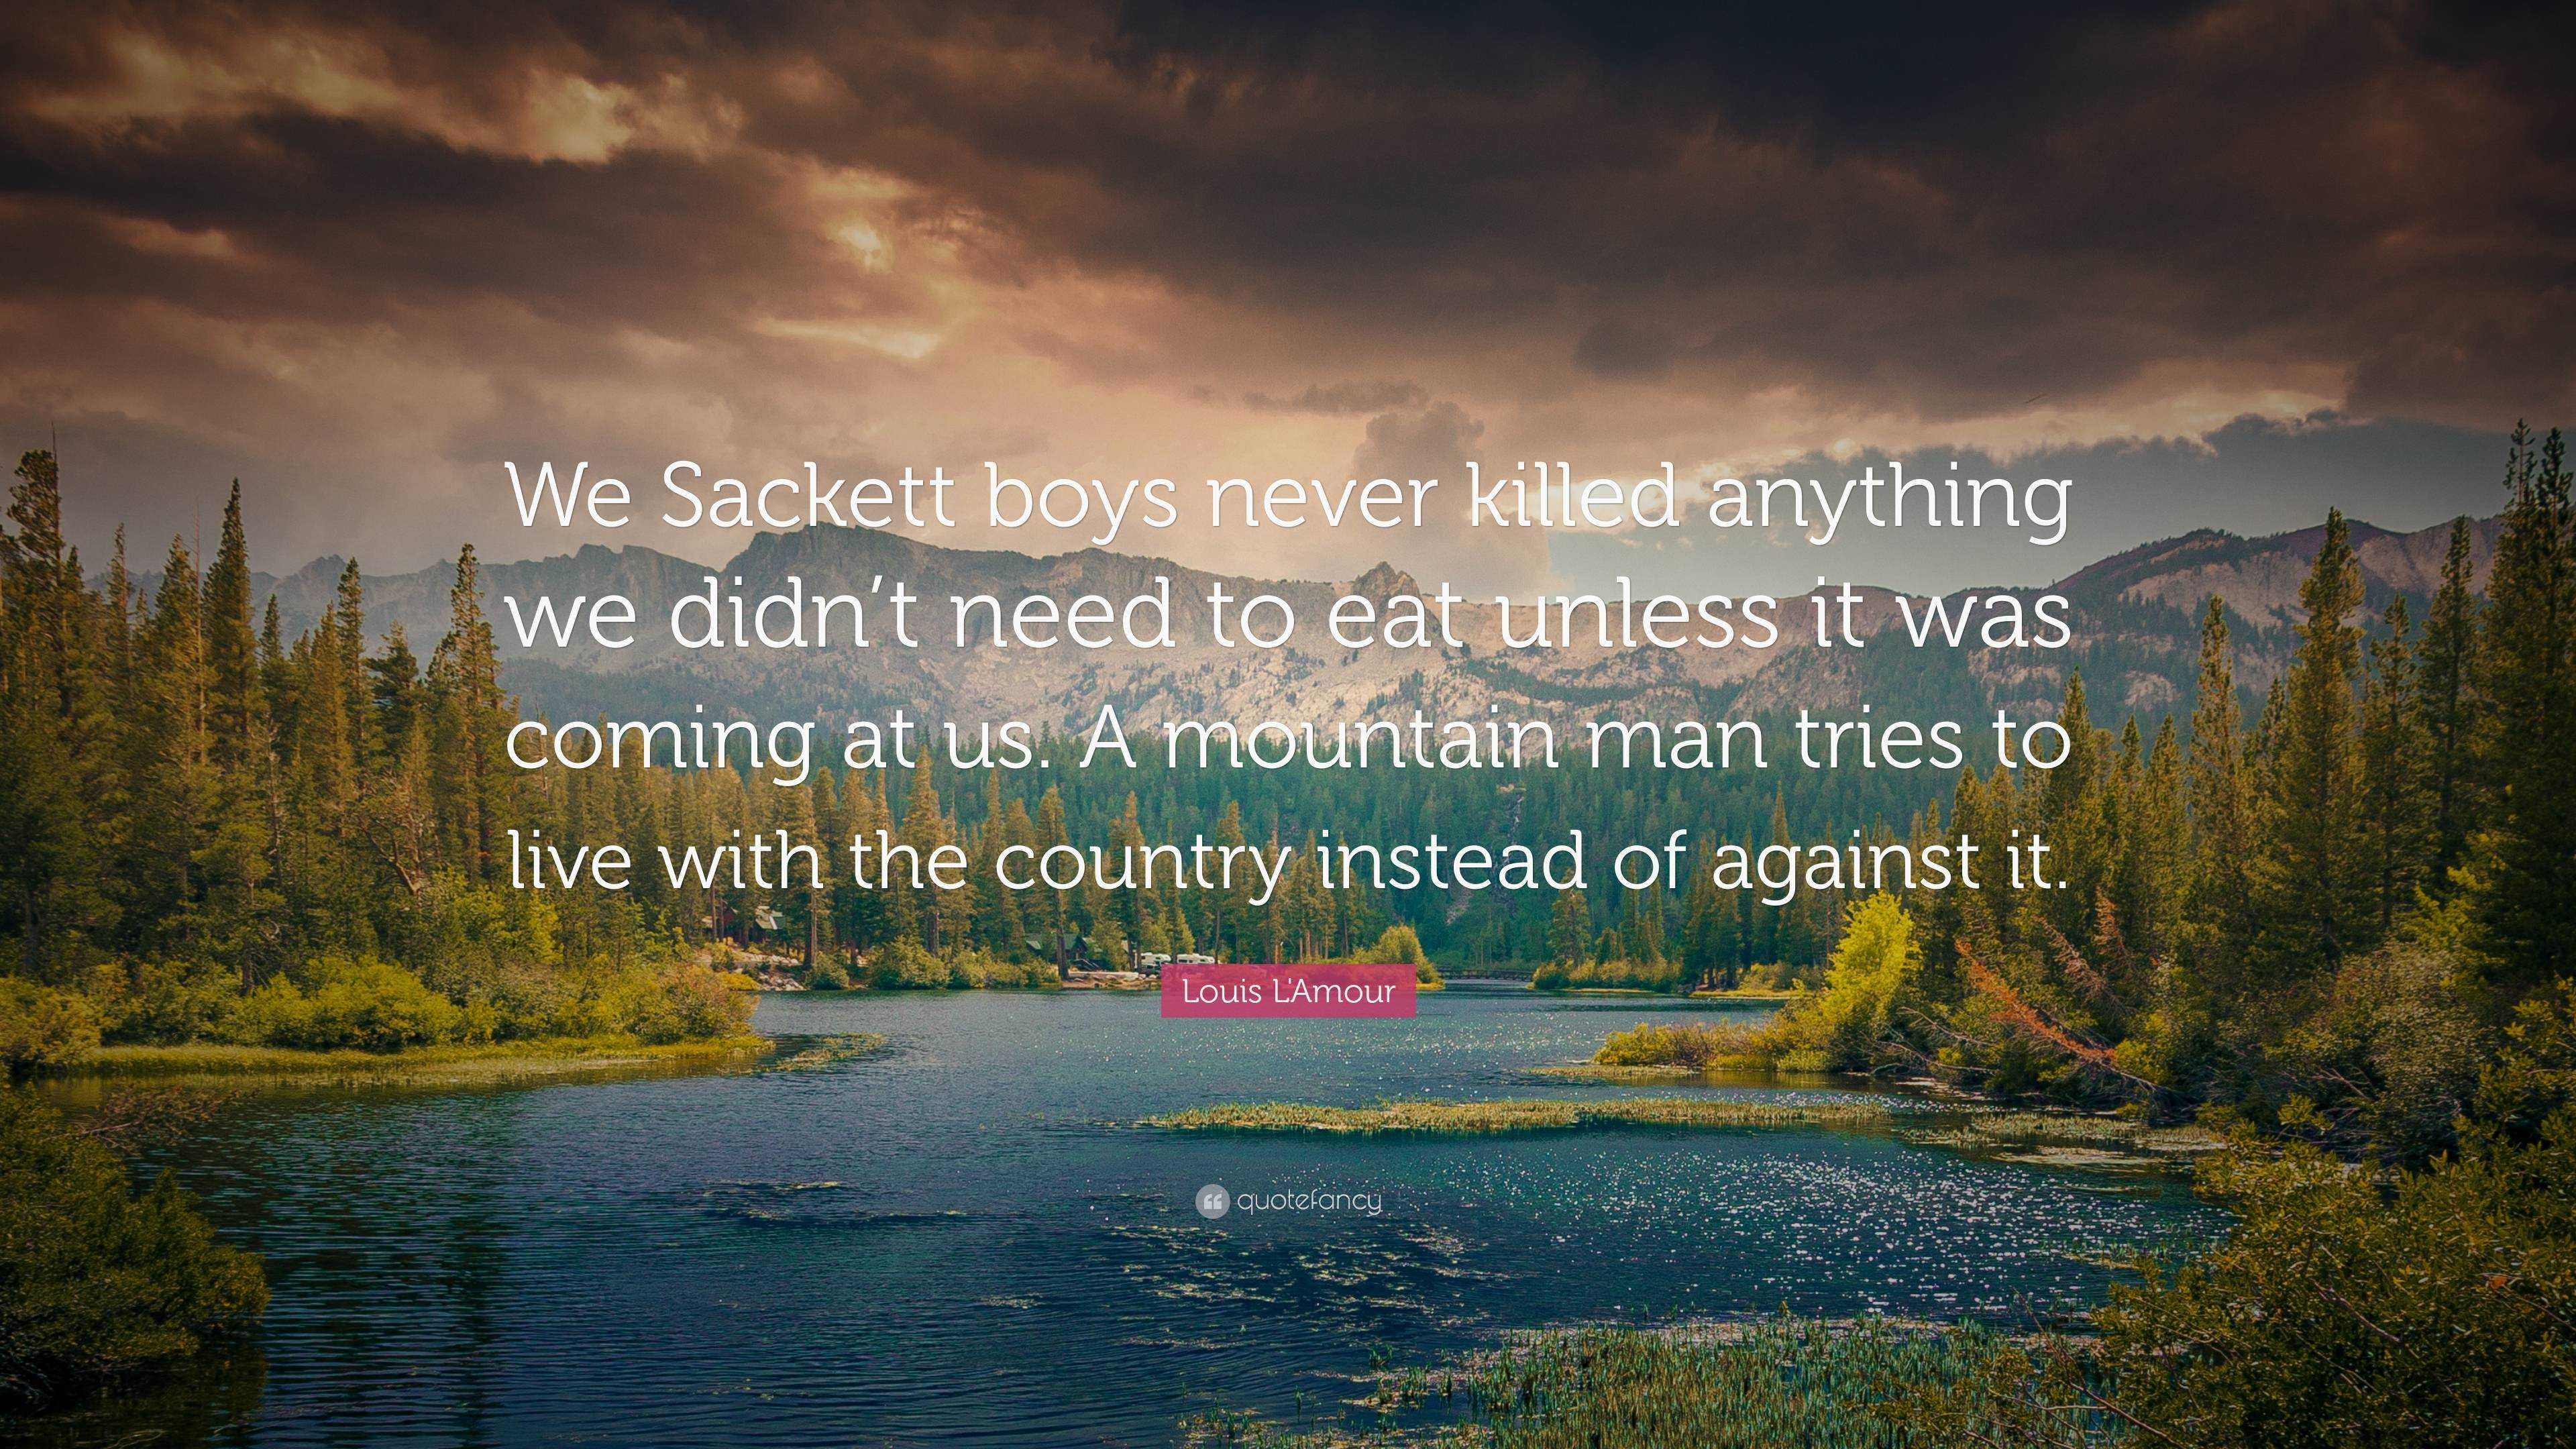 Louis L'Amour Quote: “We Sackett boys never killed anything we didn't need  to eat unless it was coming at us. A mountain man tries to live wit”